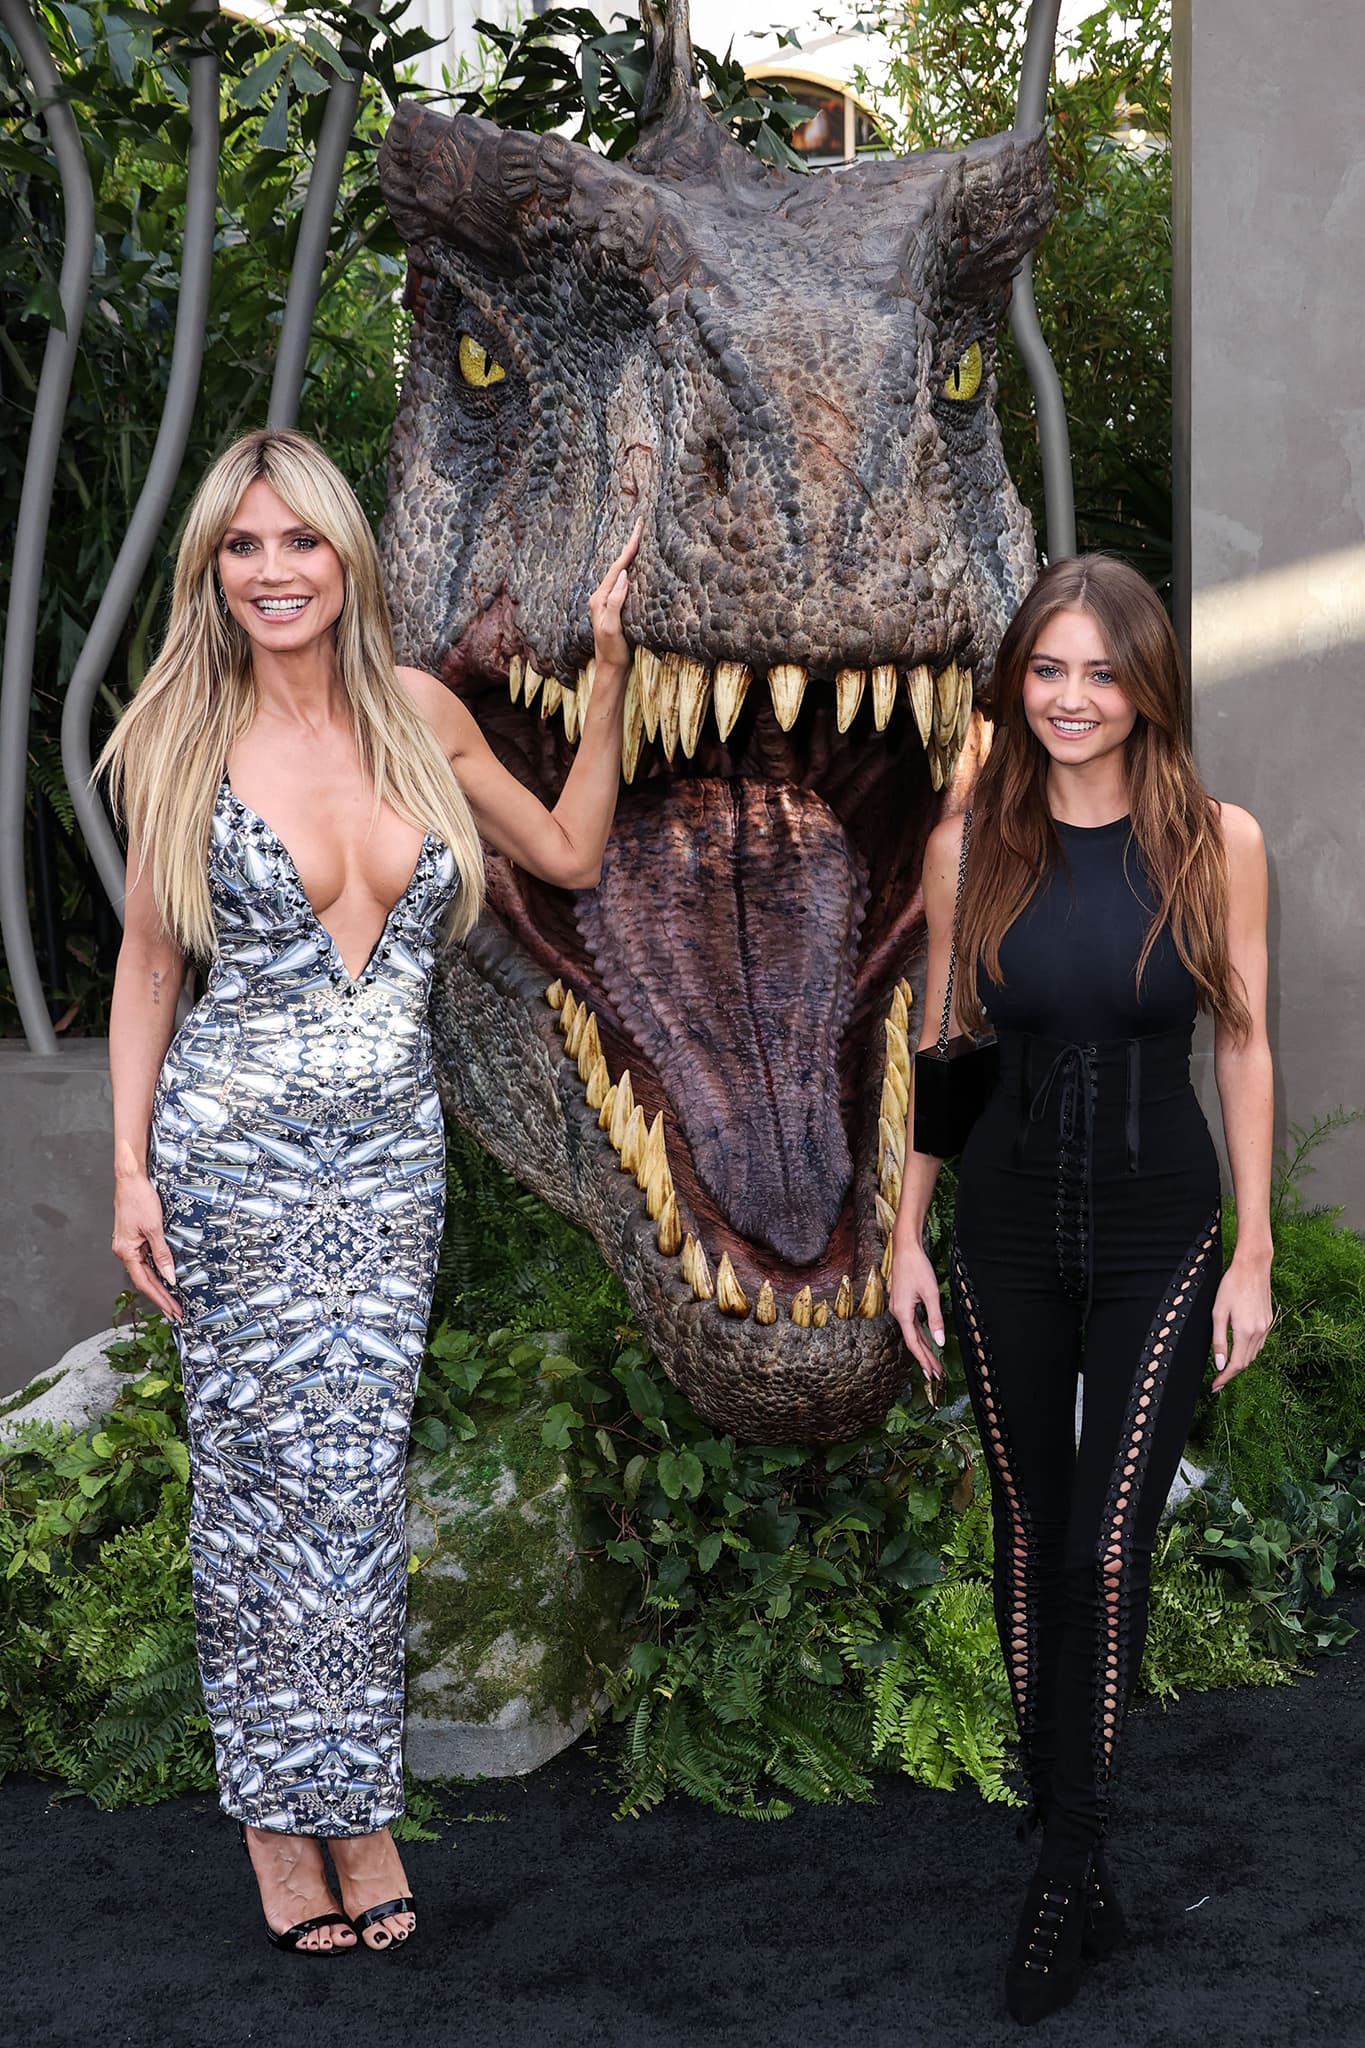 Heidi Klum and Leni Klum attend the Los Angeles premiere of Jurassic World Dominion in contrasting corseted looks on June 6, 2022